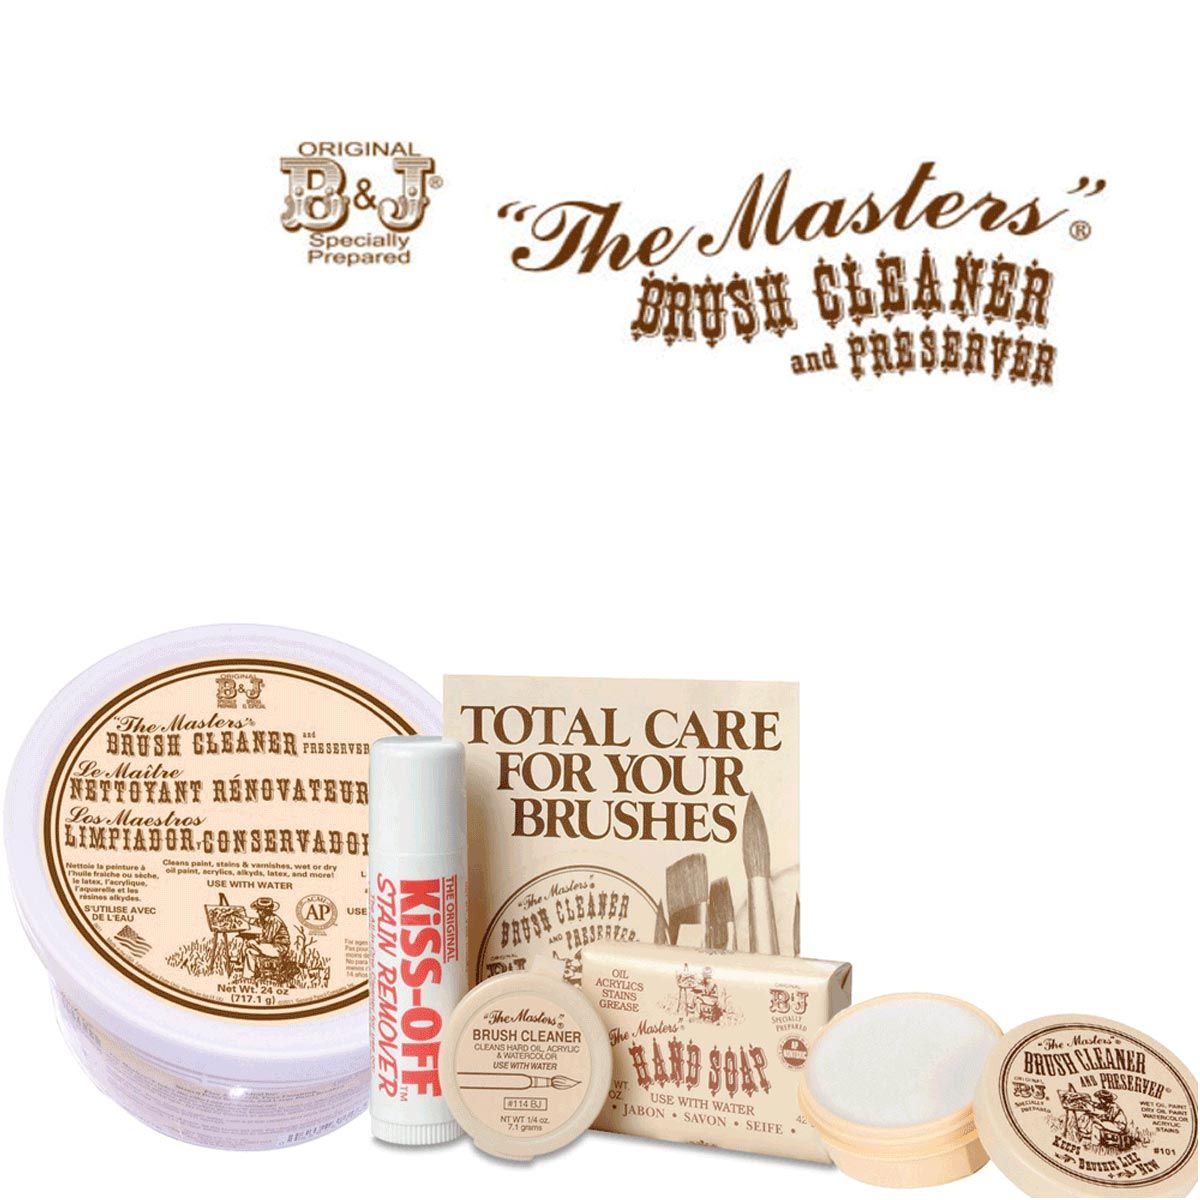 General's “The Masters” Brush Cleaner and Preserver